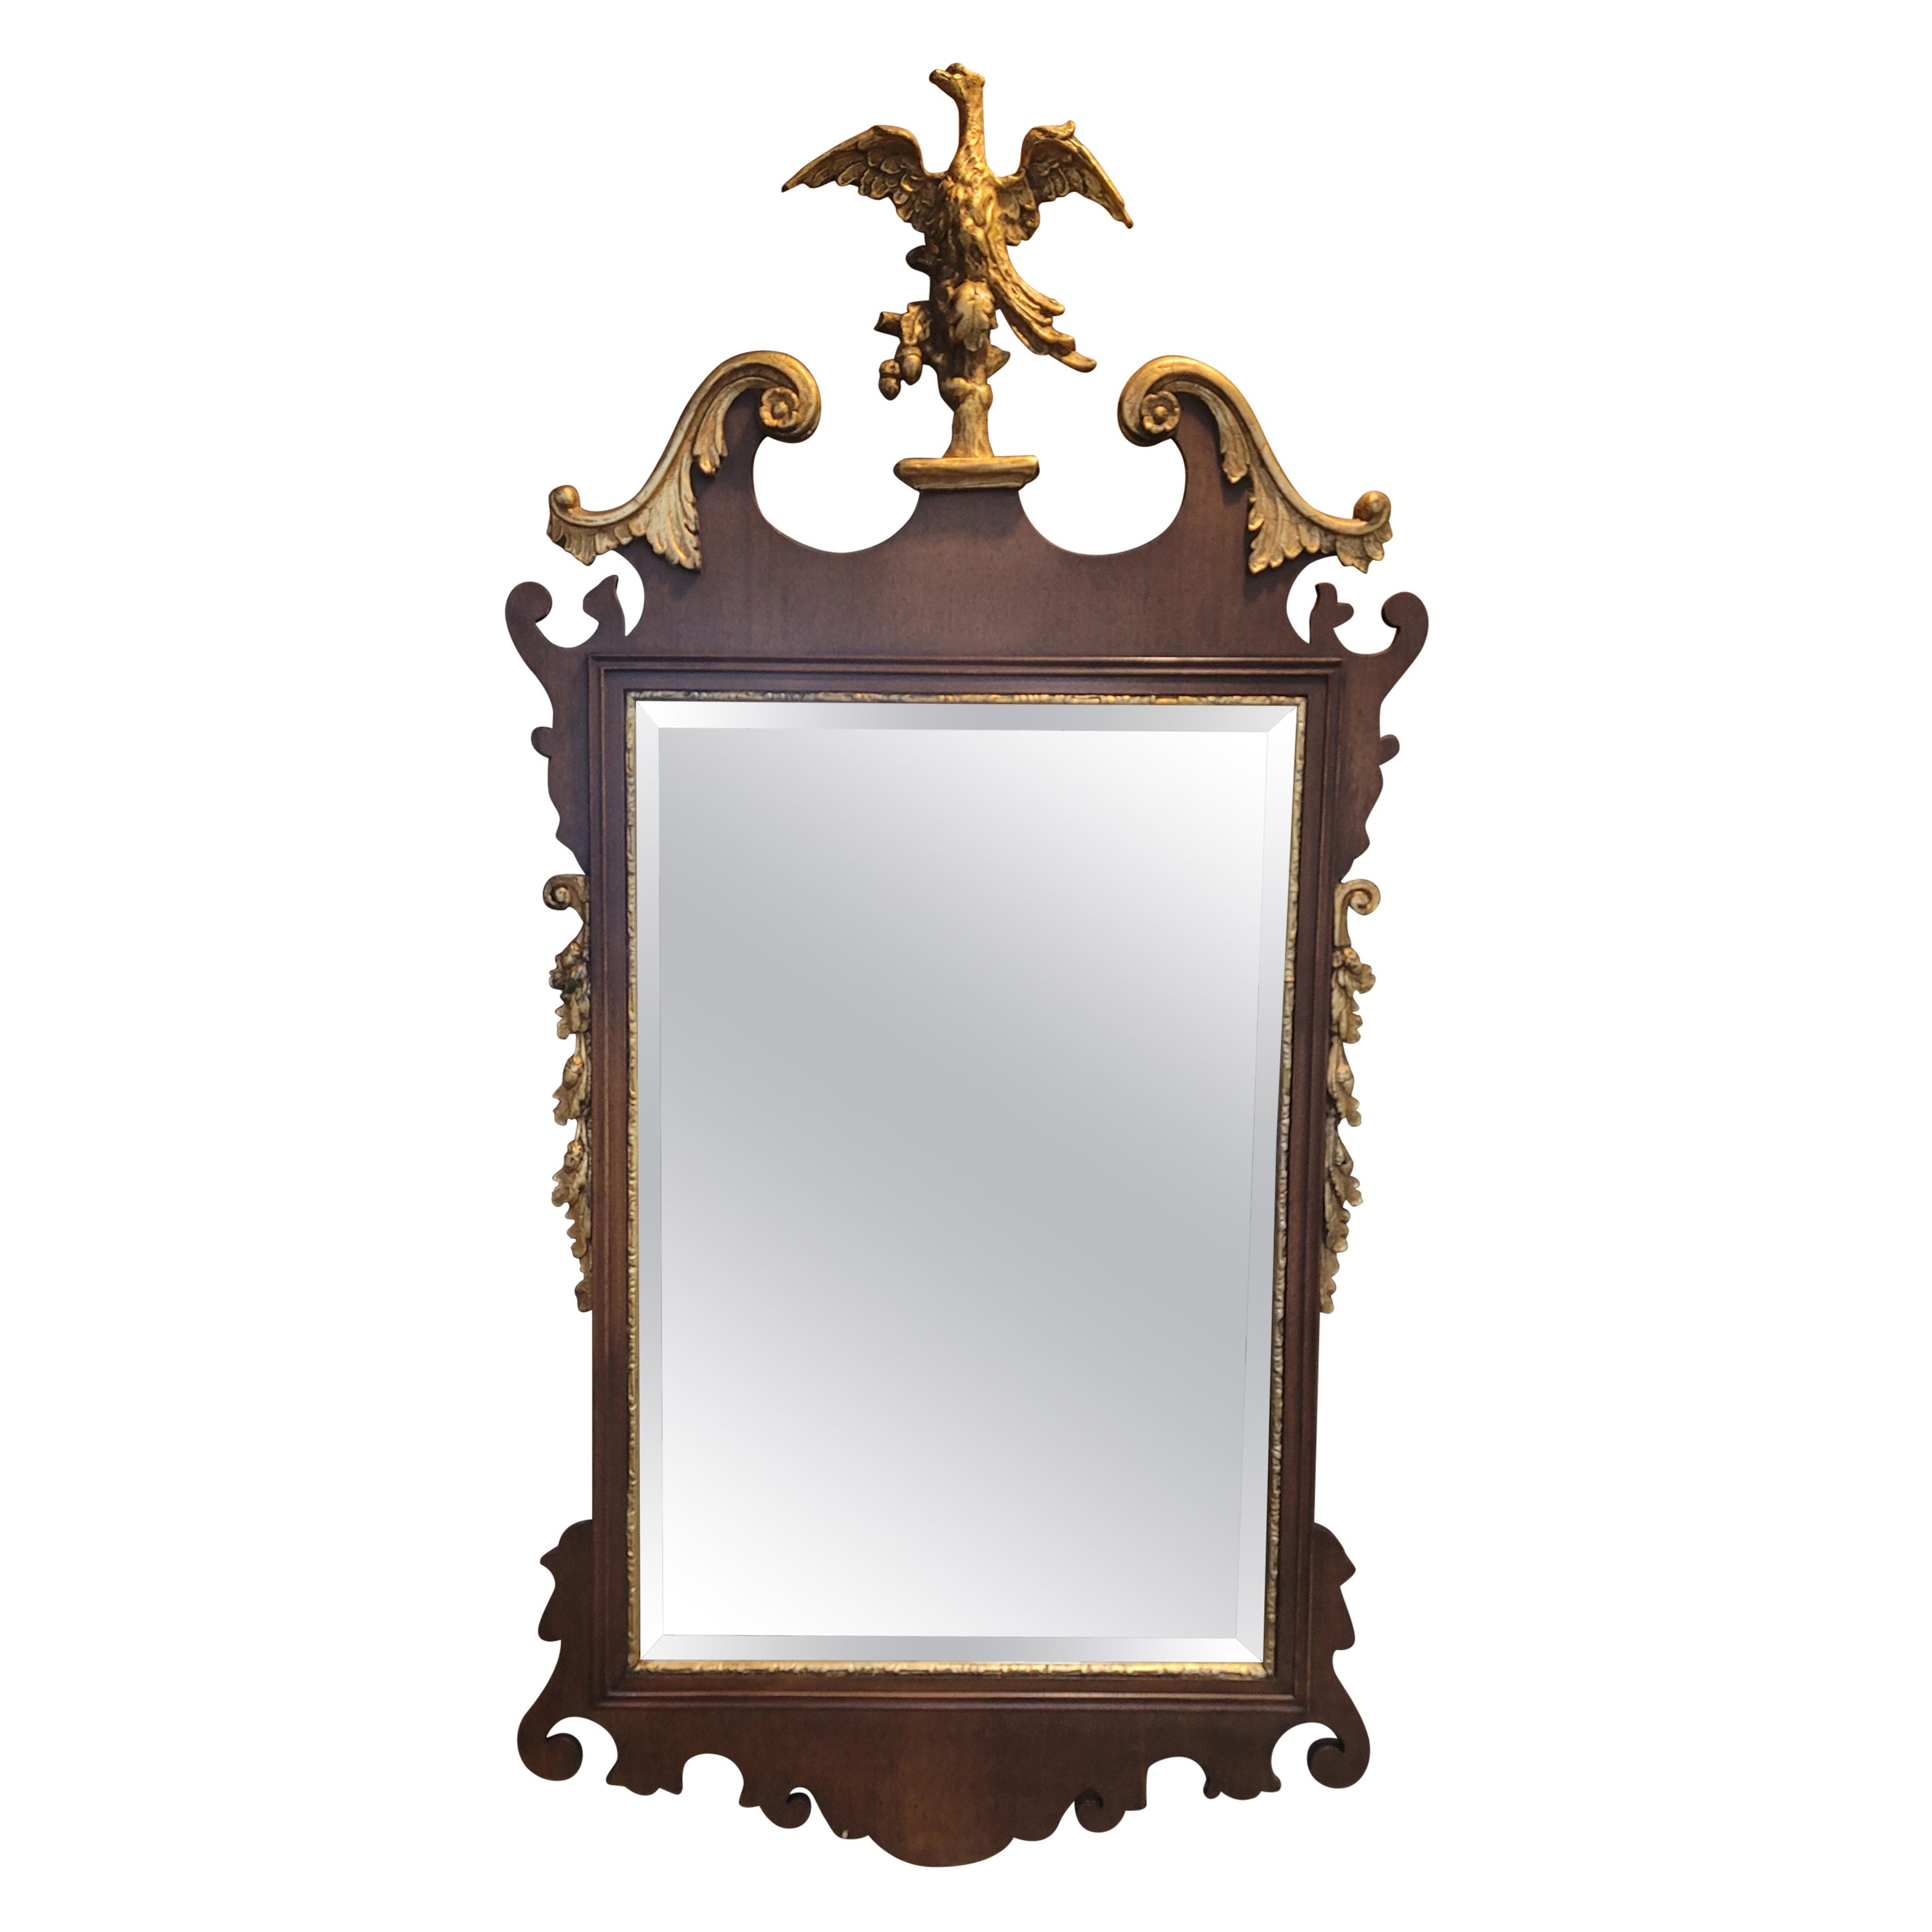 1930s English Chippendale Mahogany Parcel-Gilt Mirror w/ Phoenix Crest Finial For Sale